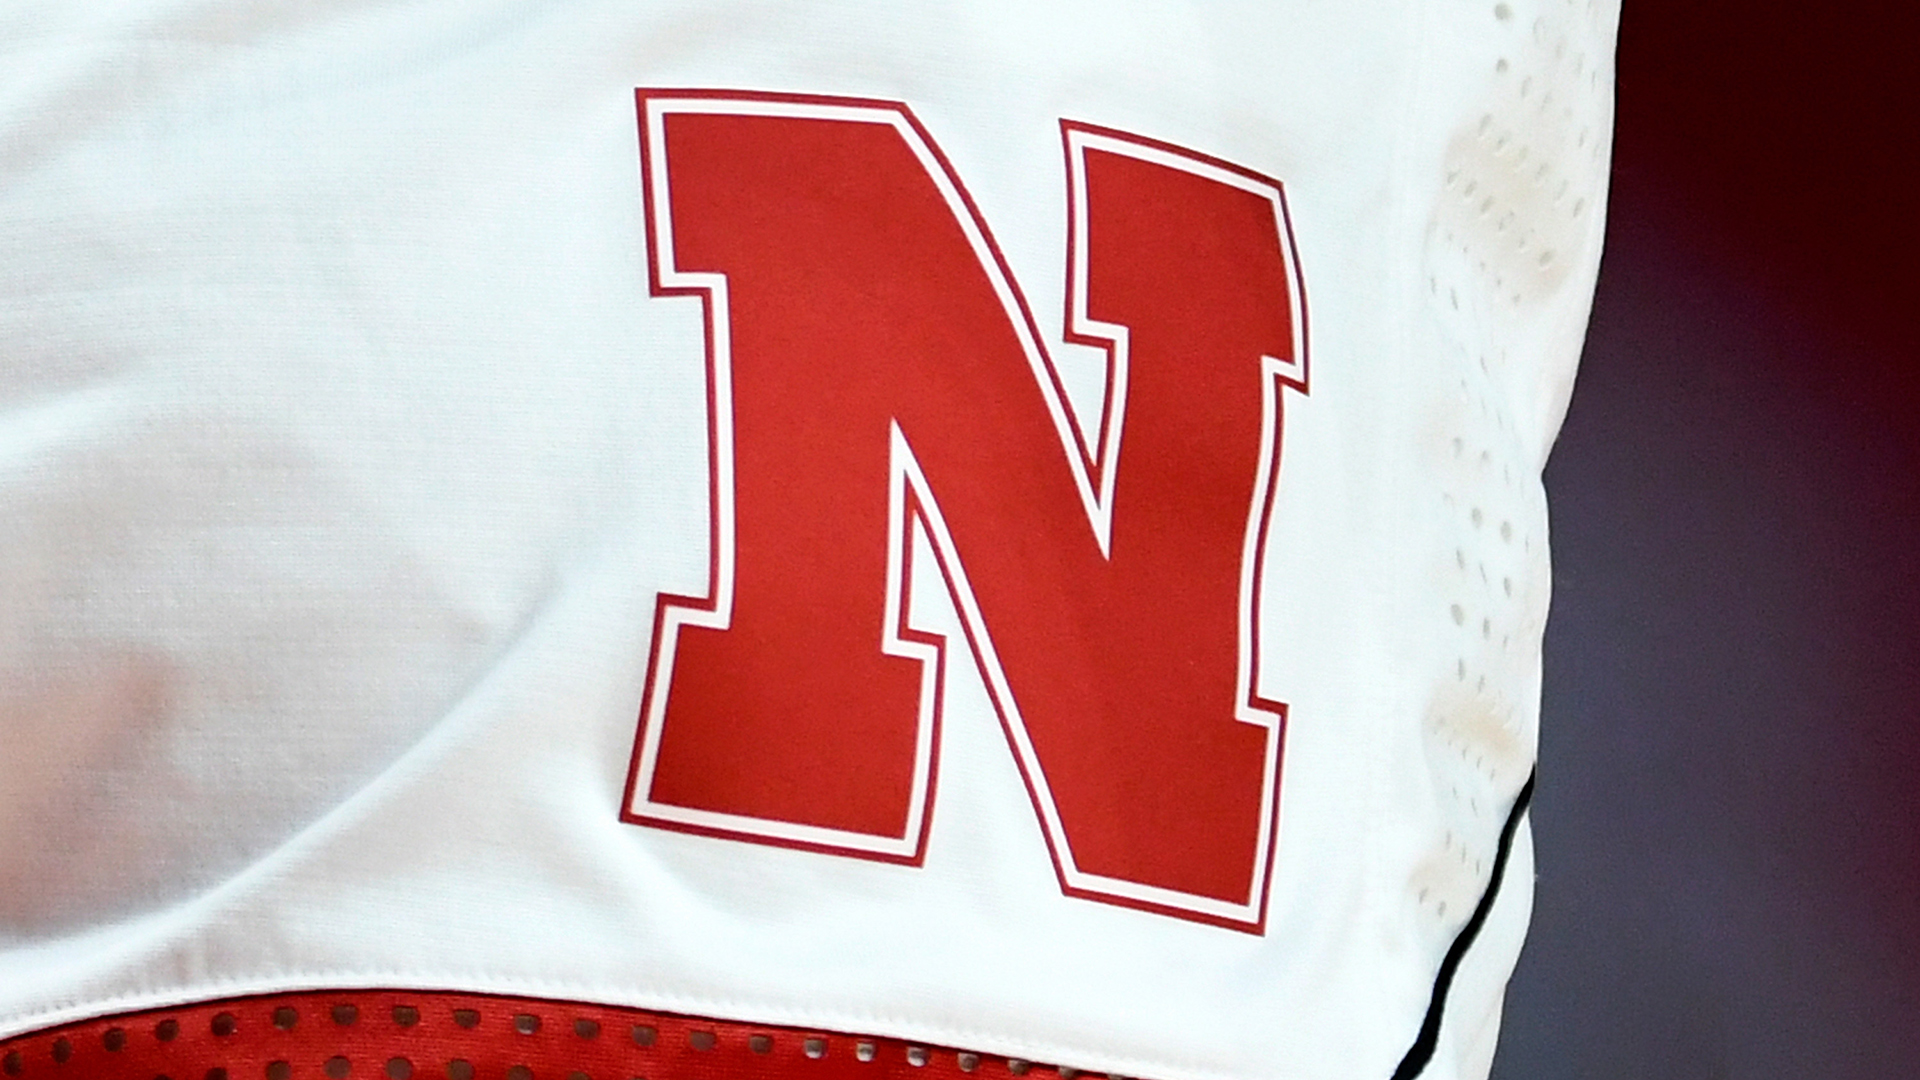 The Nebraska Cornhuskers logo on their uniform during the game against the Maryland Terrapins at Pinnacle Bank Arena on February 14, 2021 in Lincoln, Nebraska.